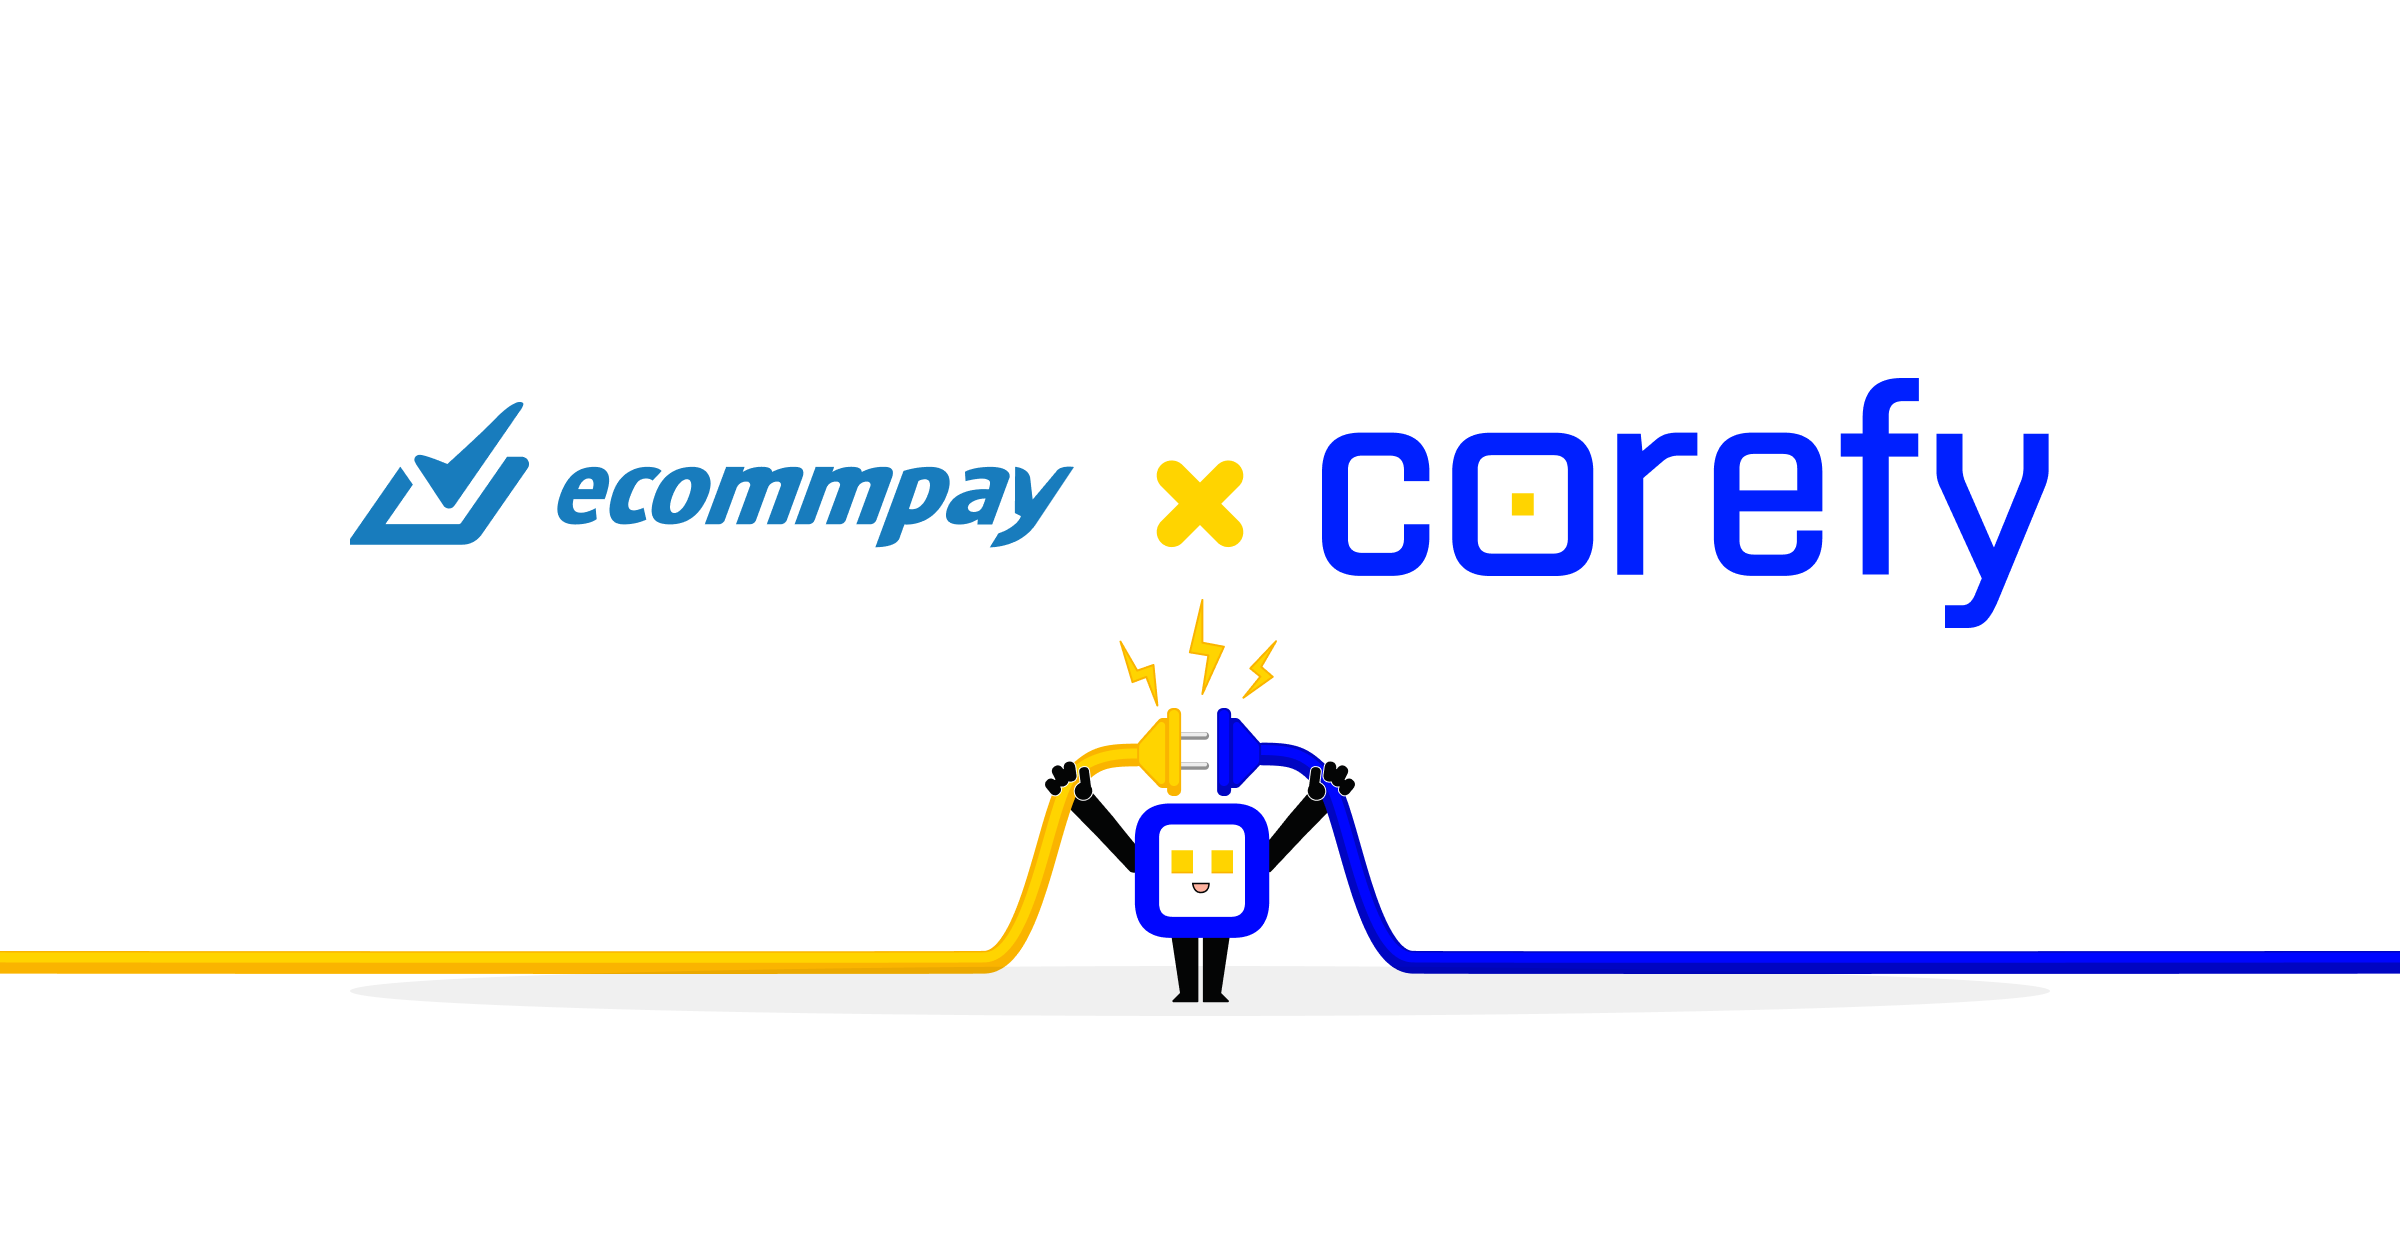 New integration with ECOMMPAY